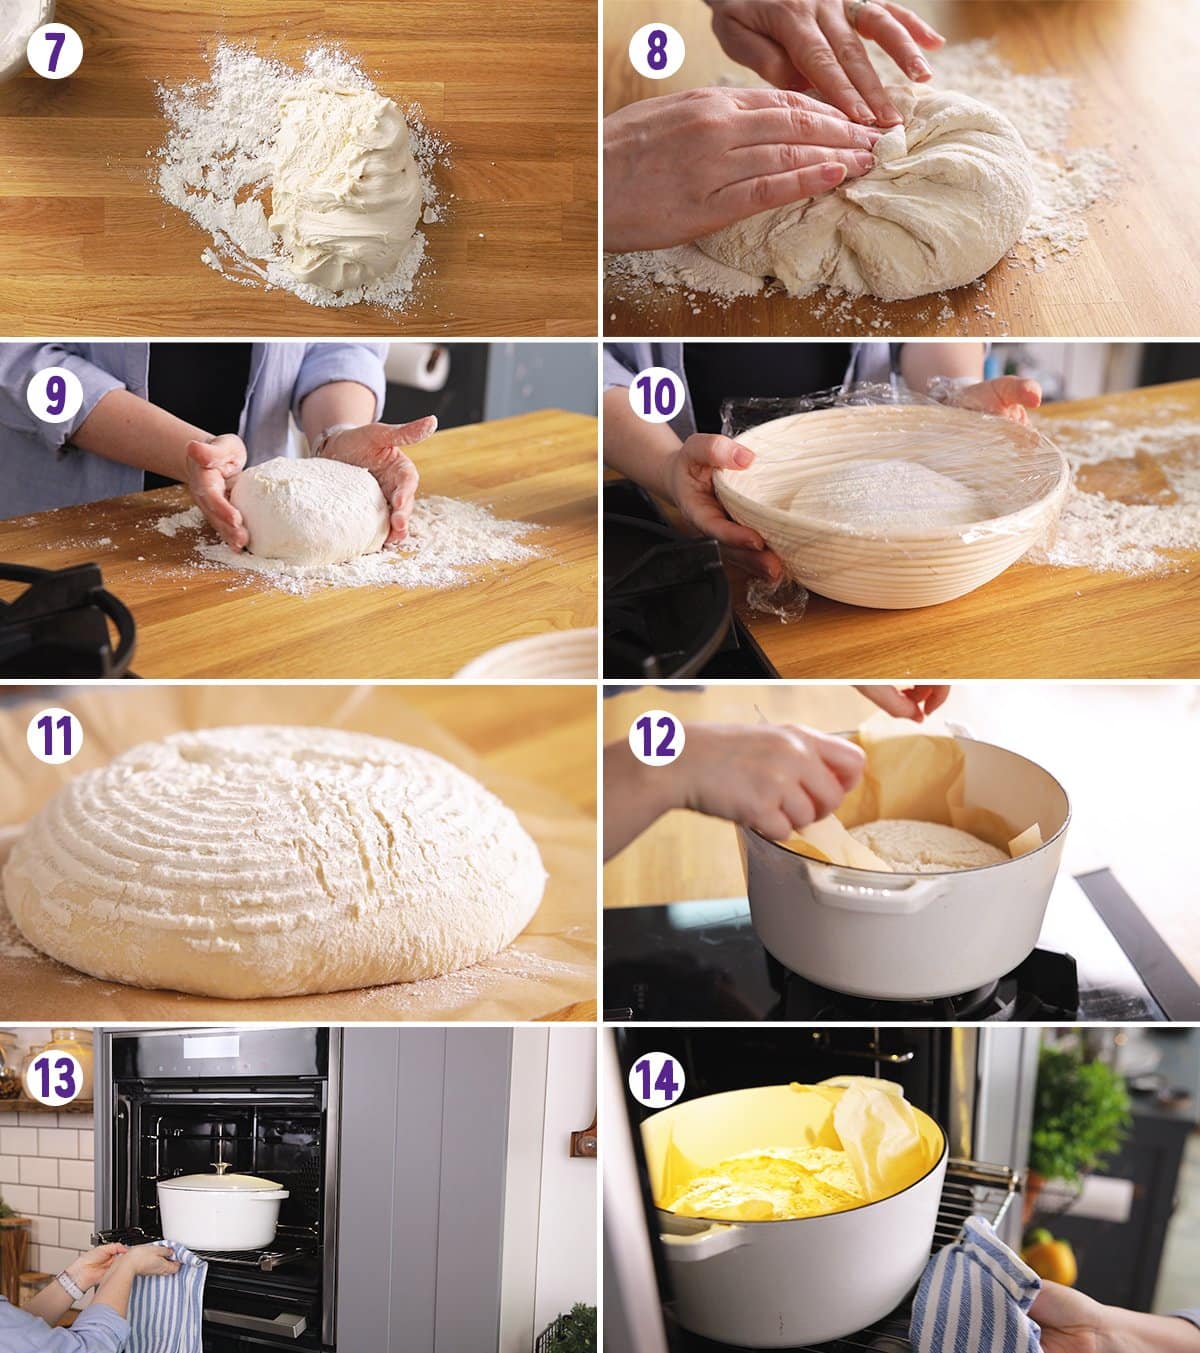 8 image collage showing final steps for making artisan bread at home